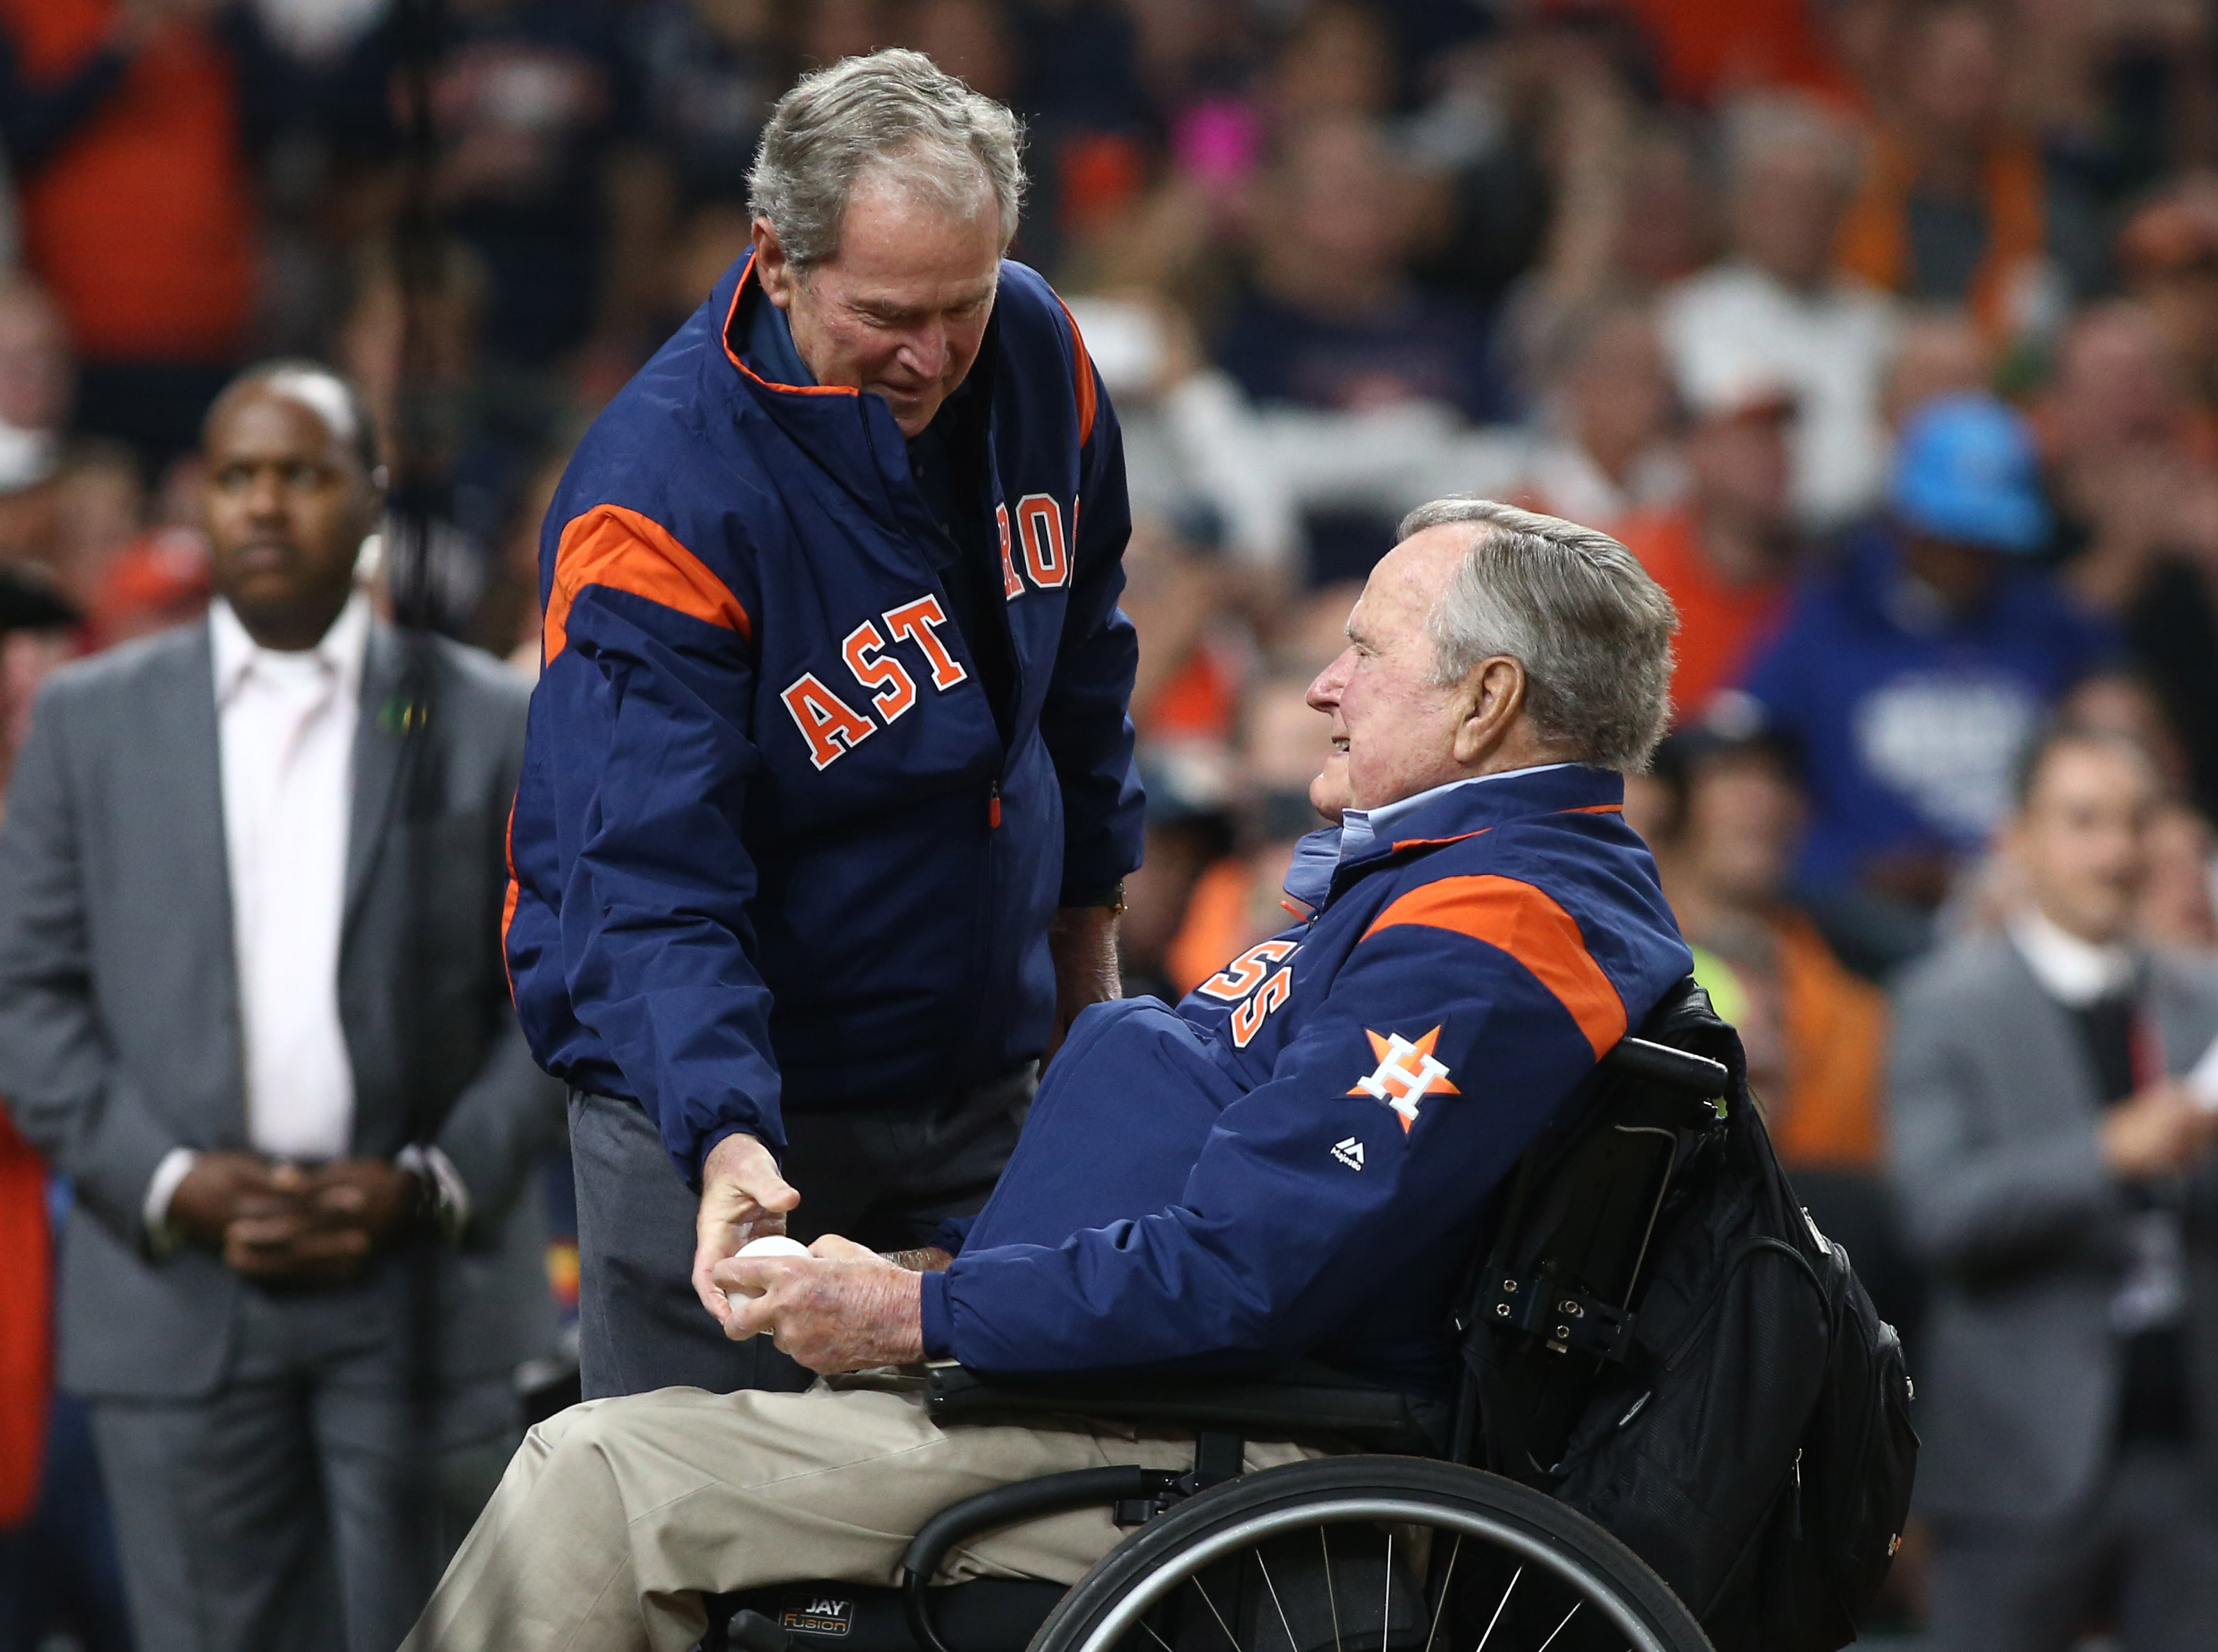 Photos: Bush 43 throws out 1st pitch after getting ball from dad